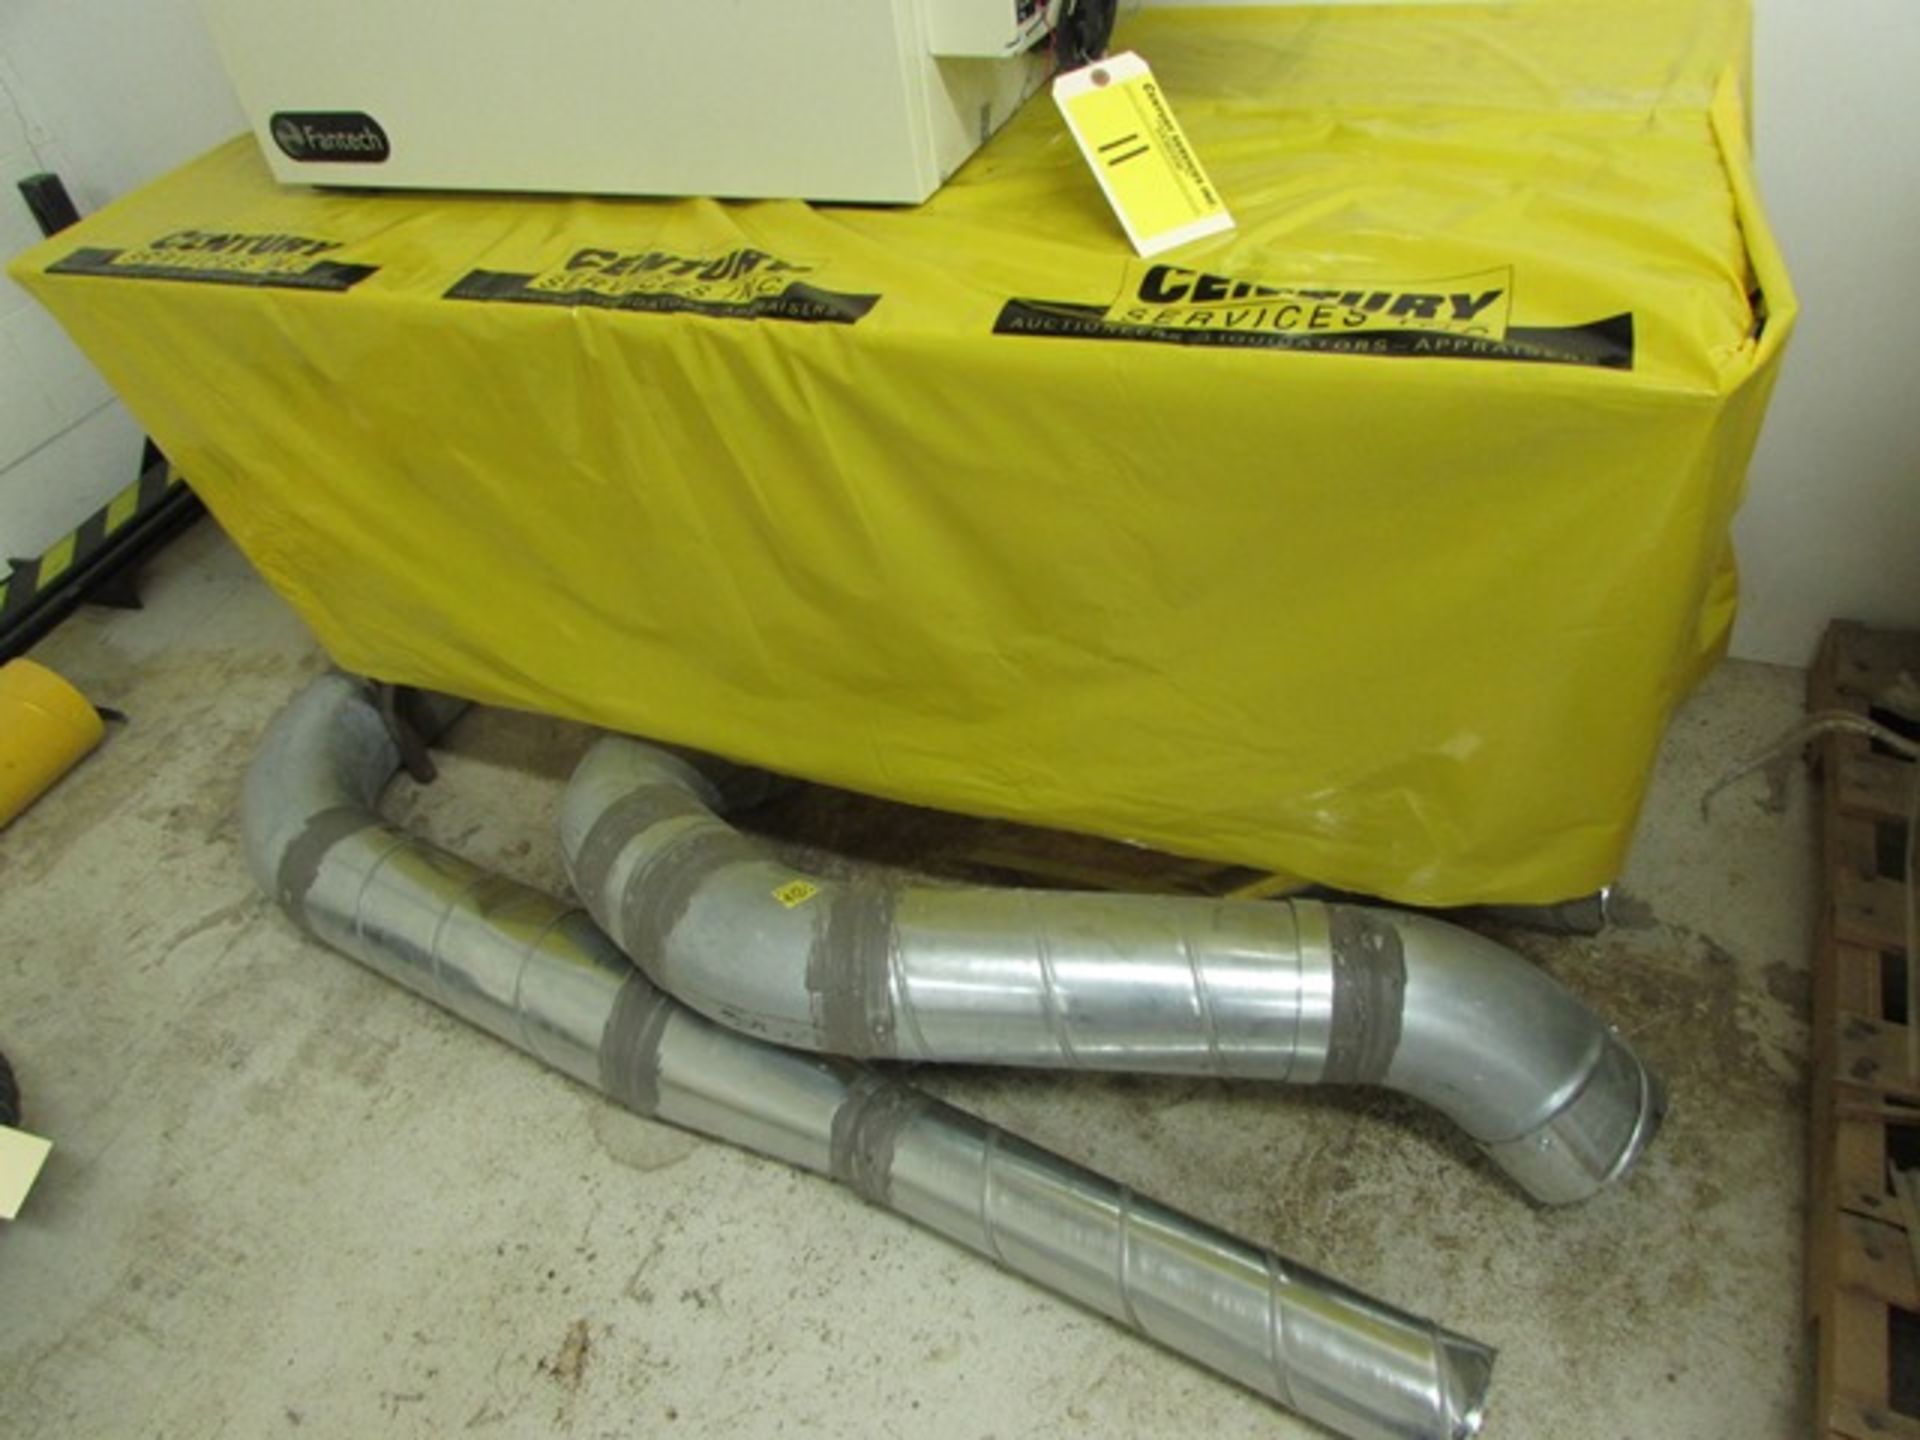 Fantech "SHR-2004" ventilation system c/w 2-sections ducting S/N - 1345 1293D - Image 2 of 3